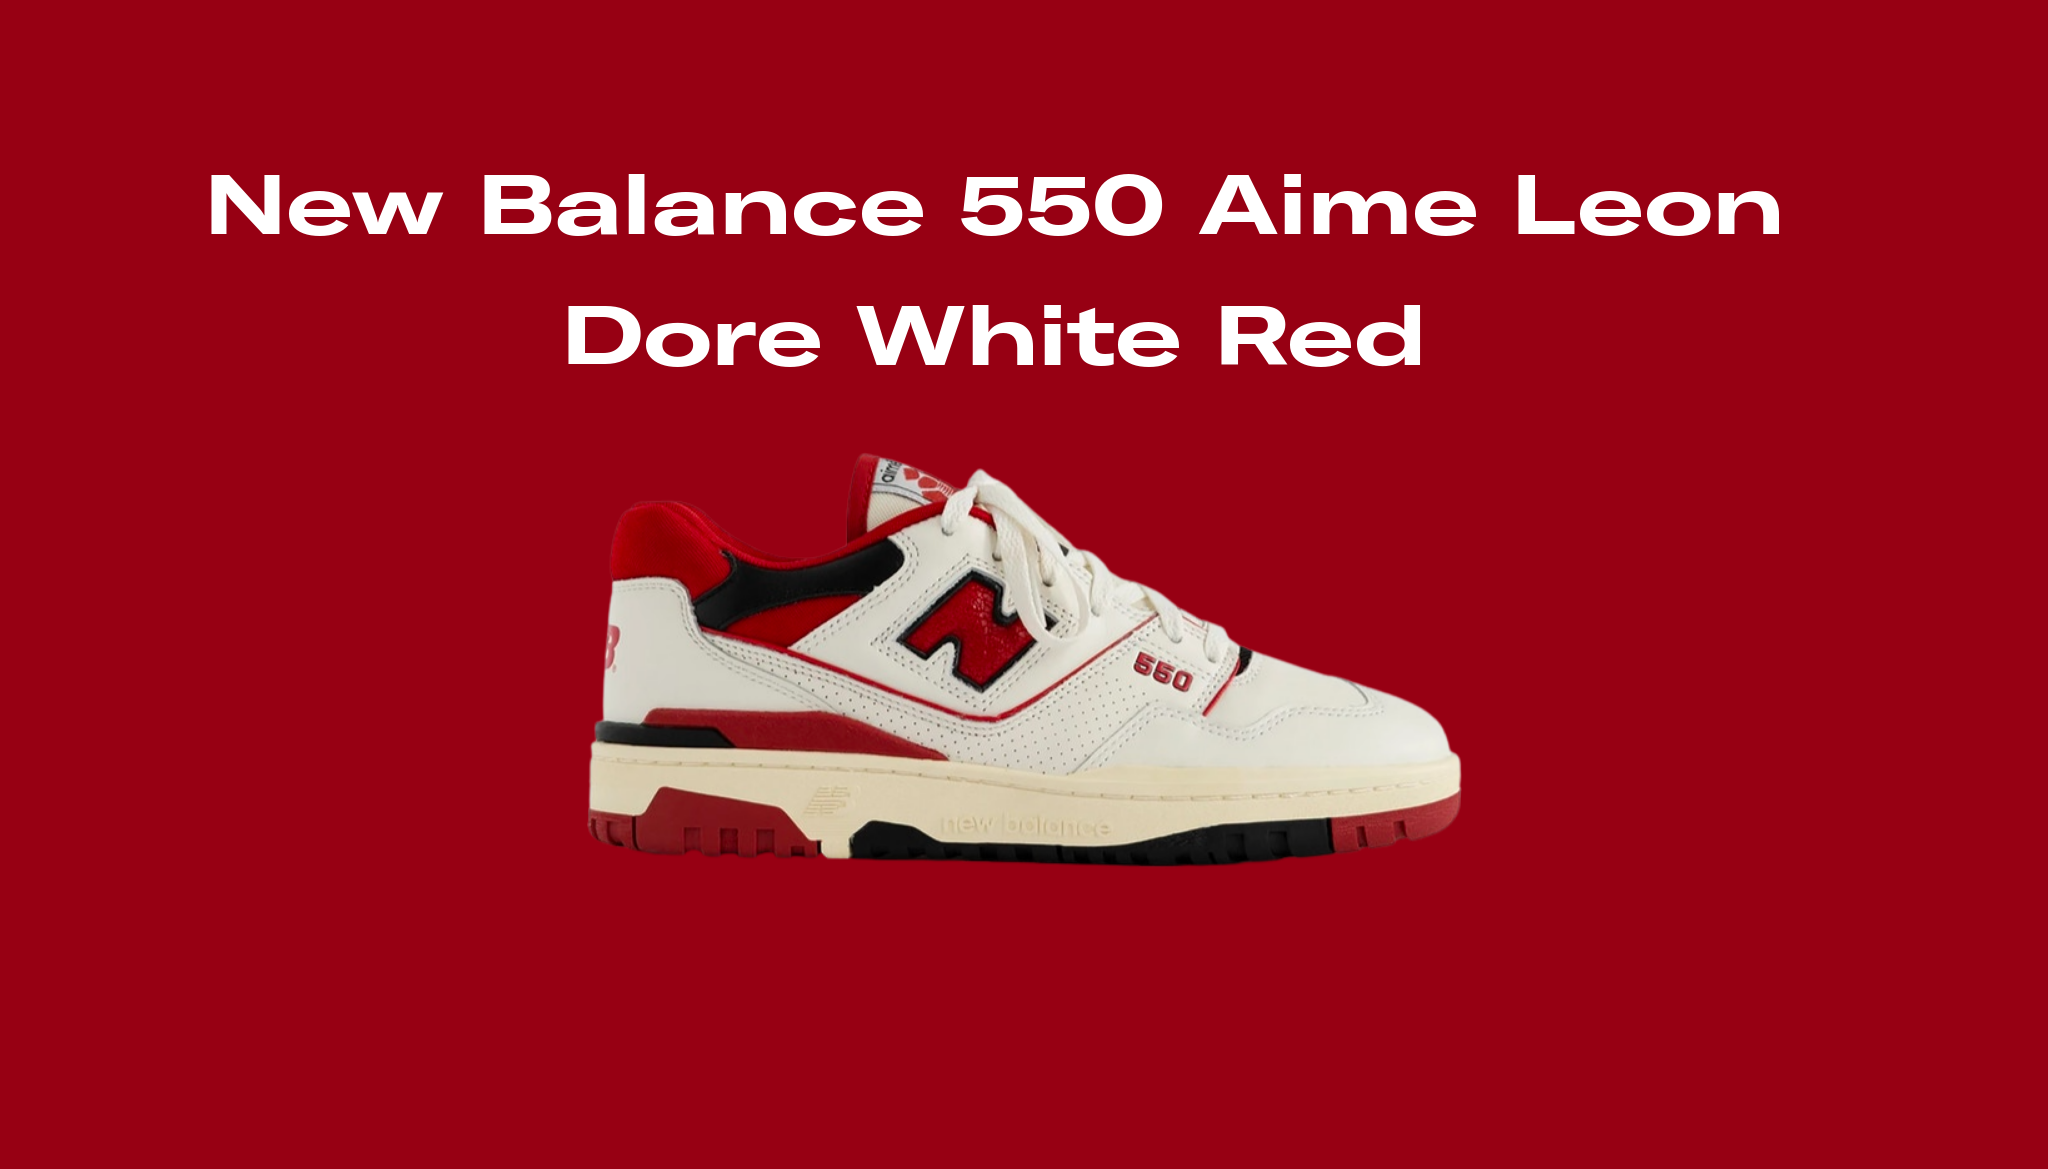 New Balance 550 Aime Leon Dore White Red Raffles and Release Date